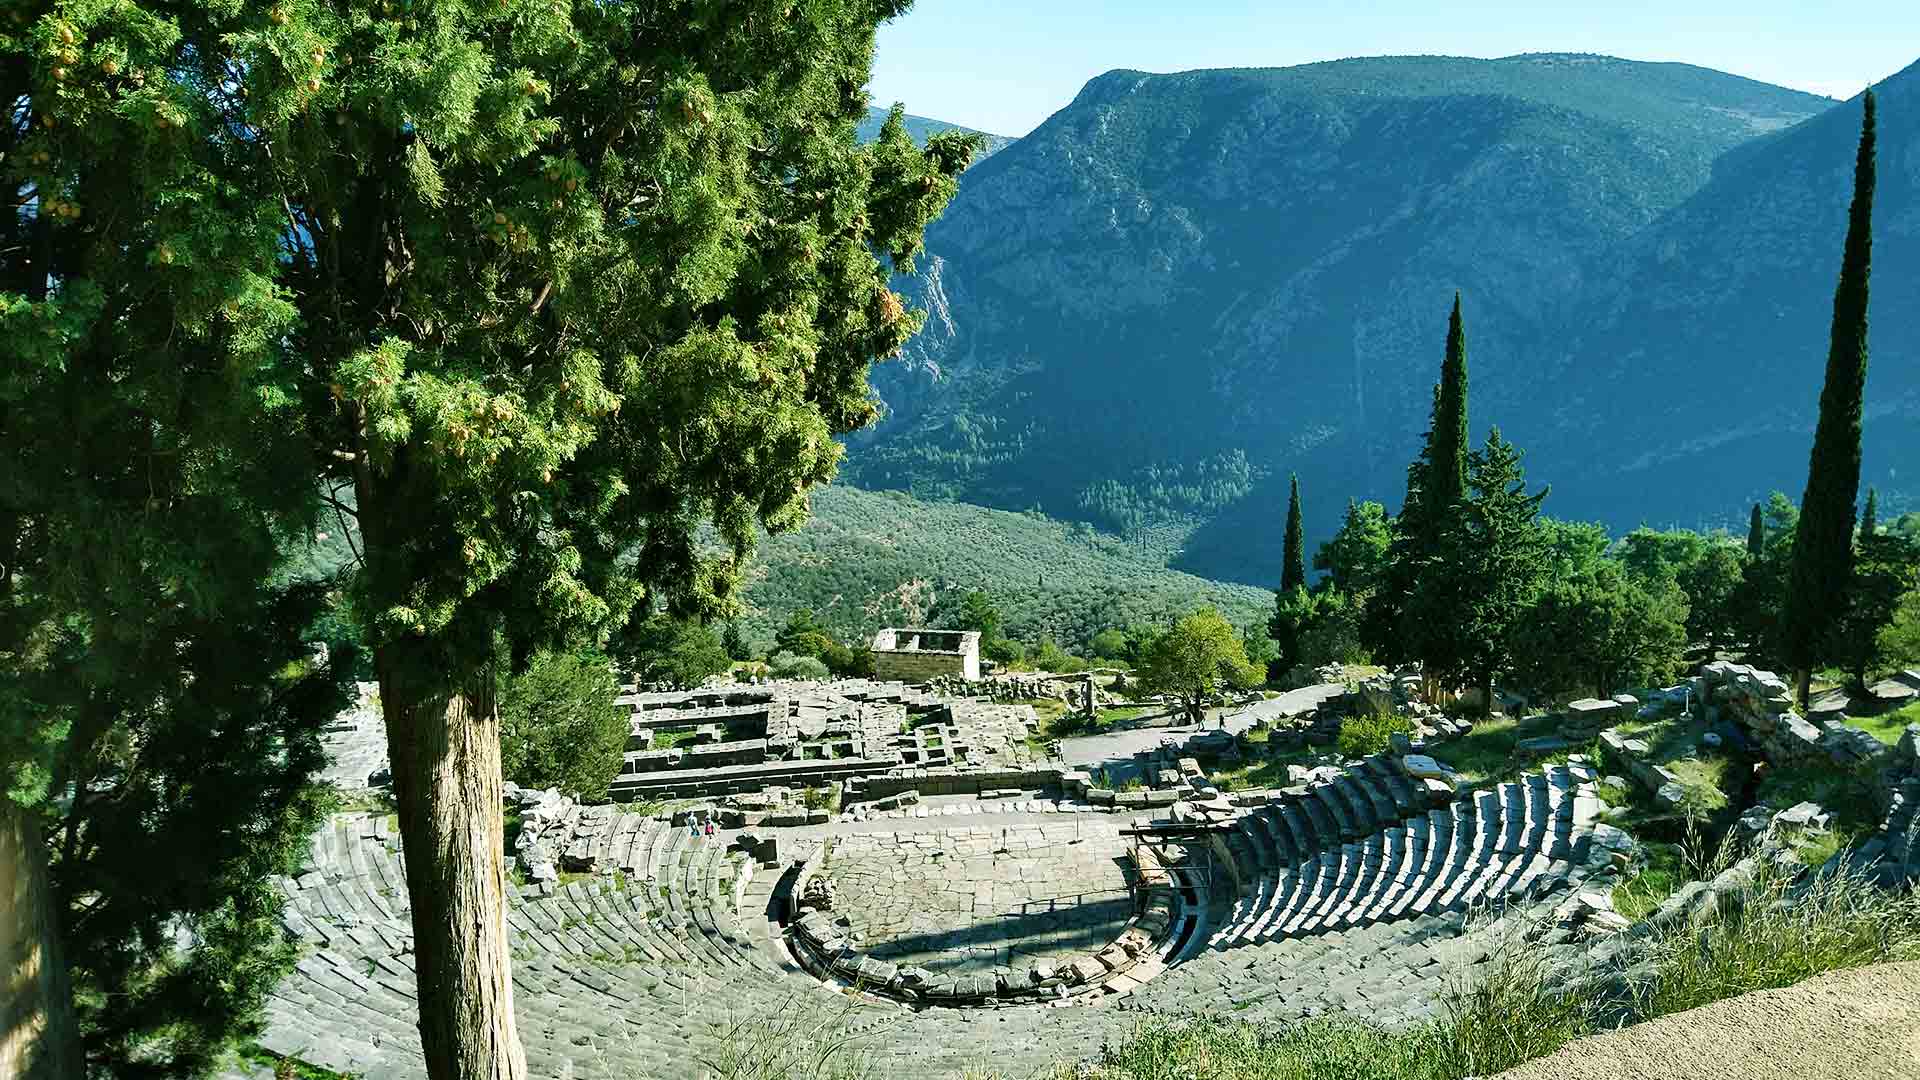 Encounter the theatre in Delphi with a dutch speaking or german speaking guide